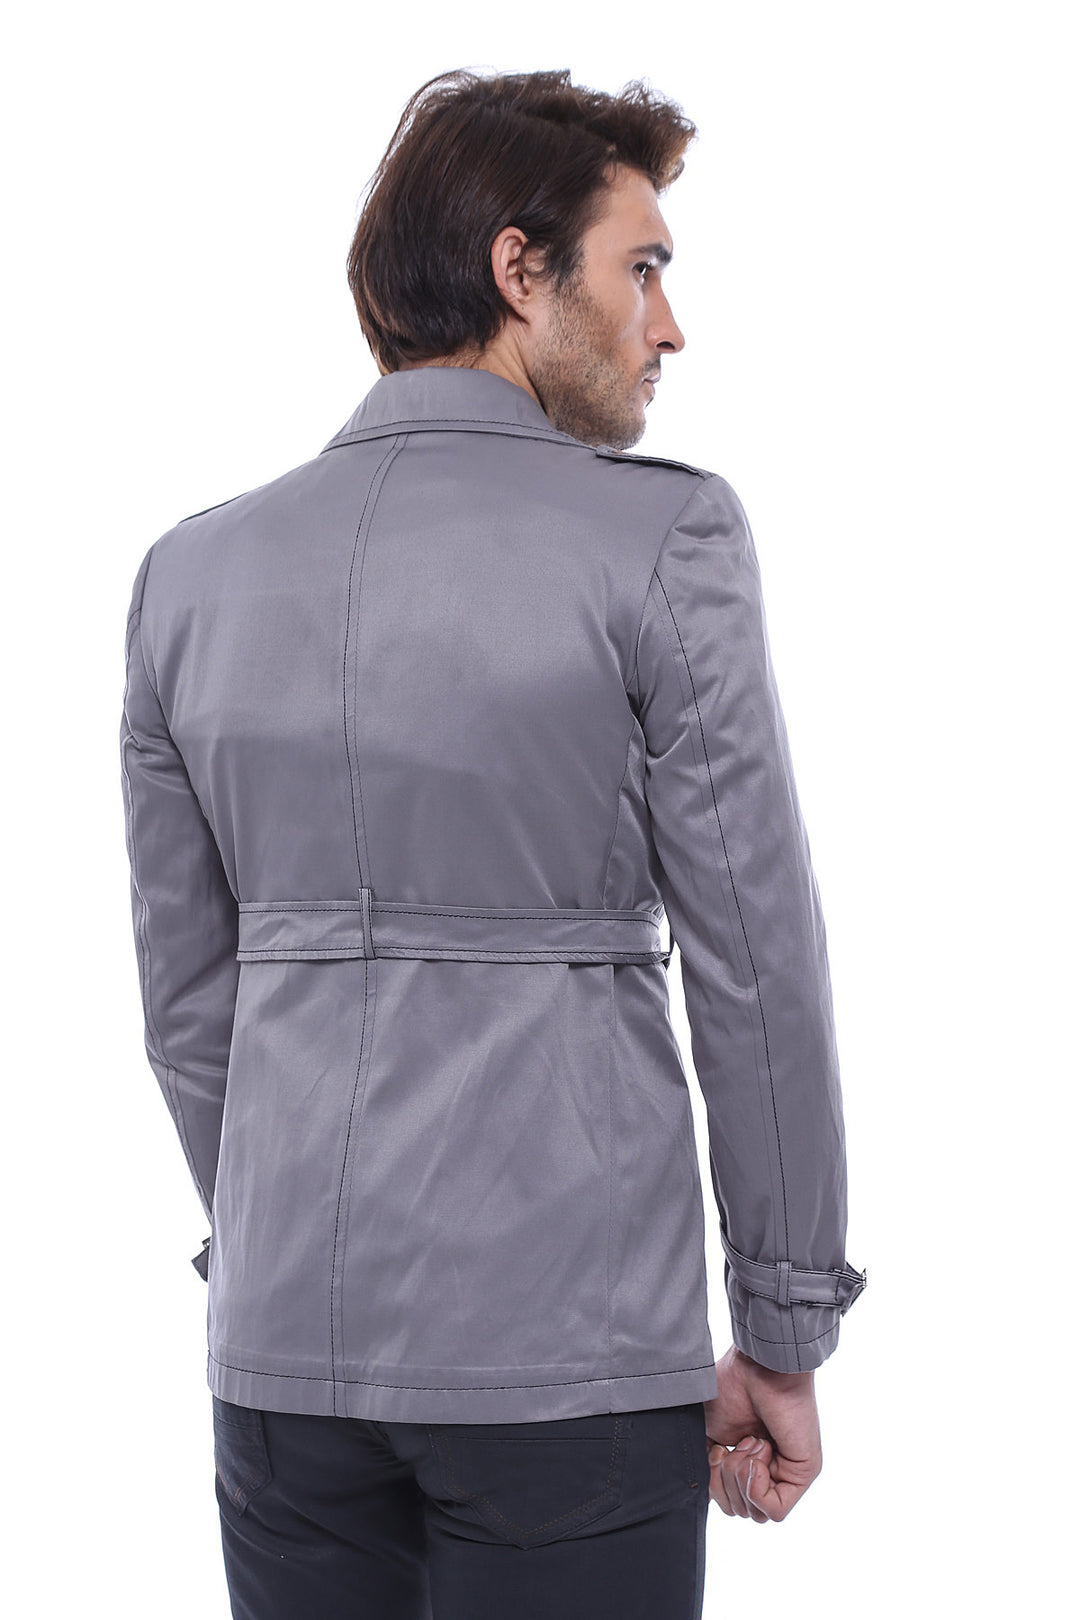 Double Breasted Grey Men Trench Coat - Wessi